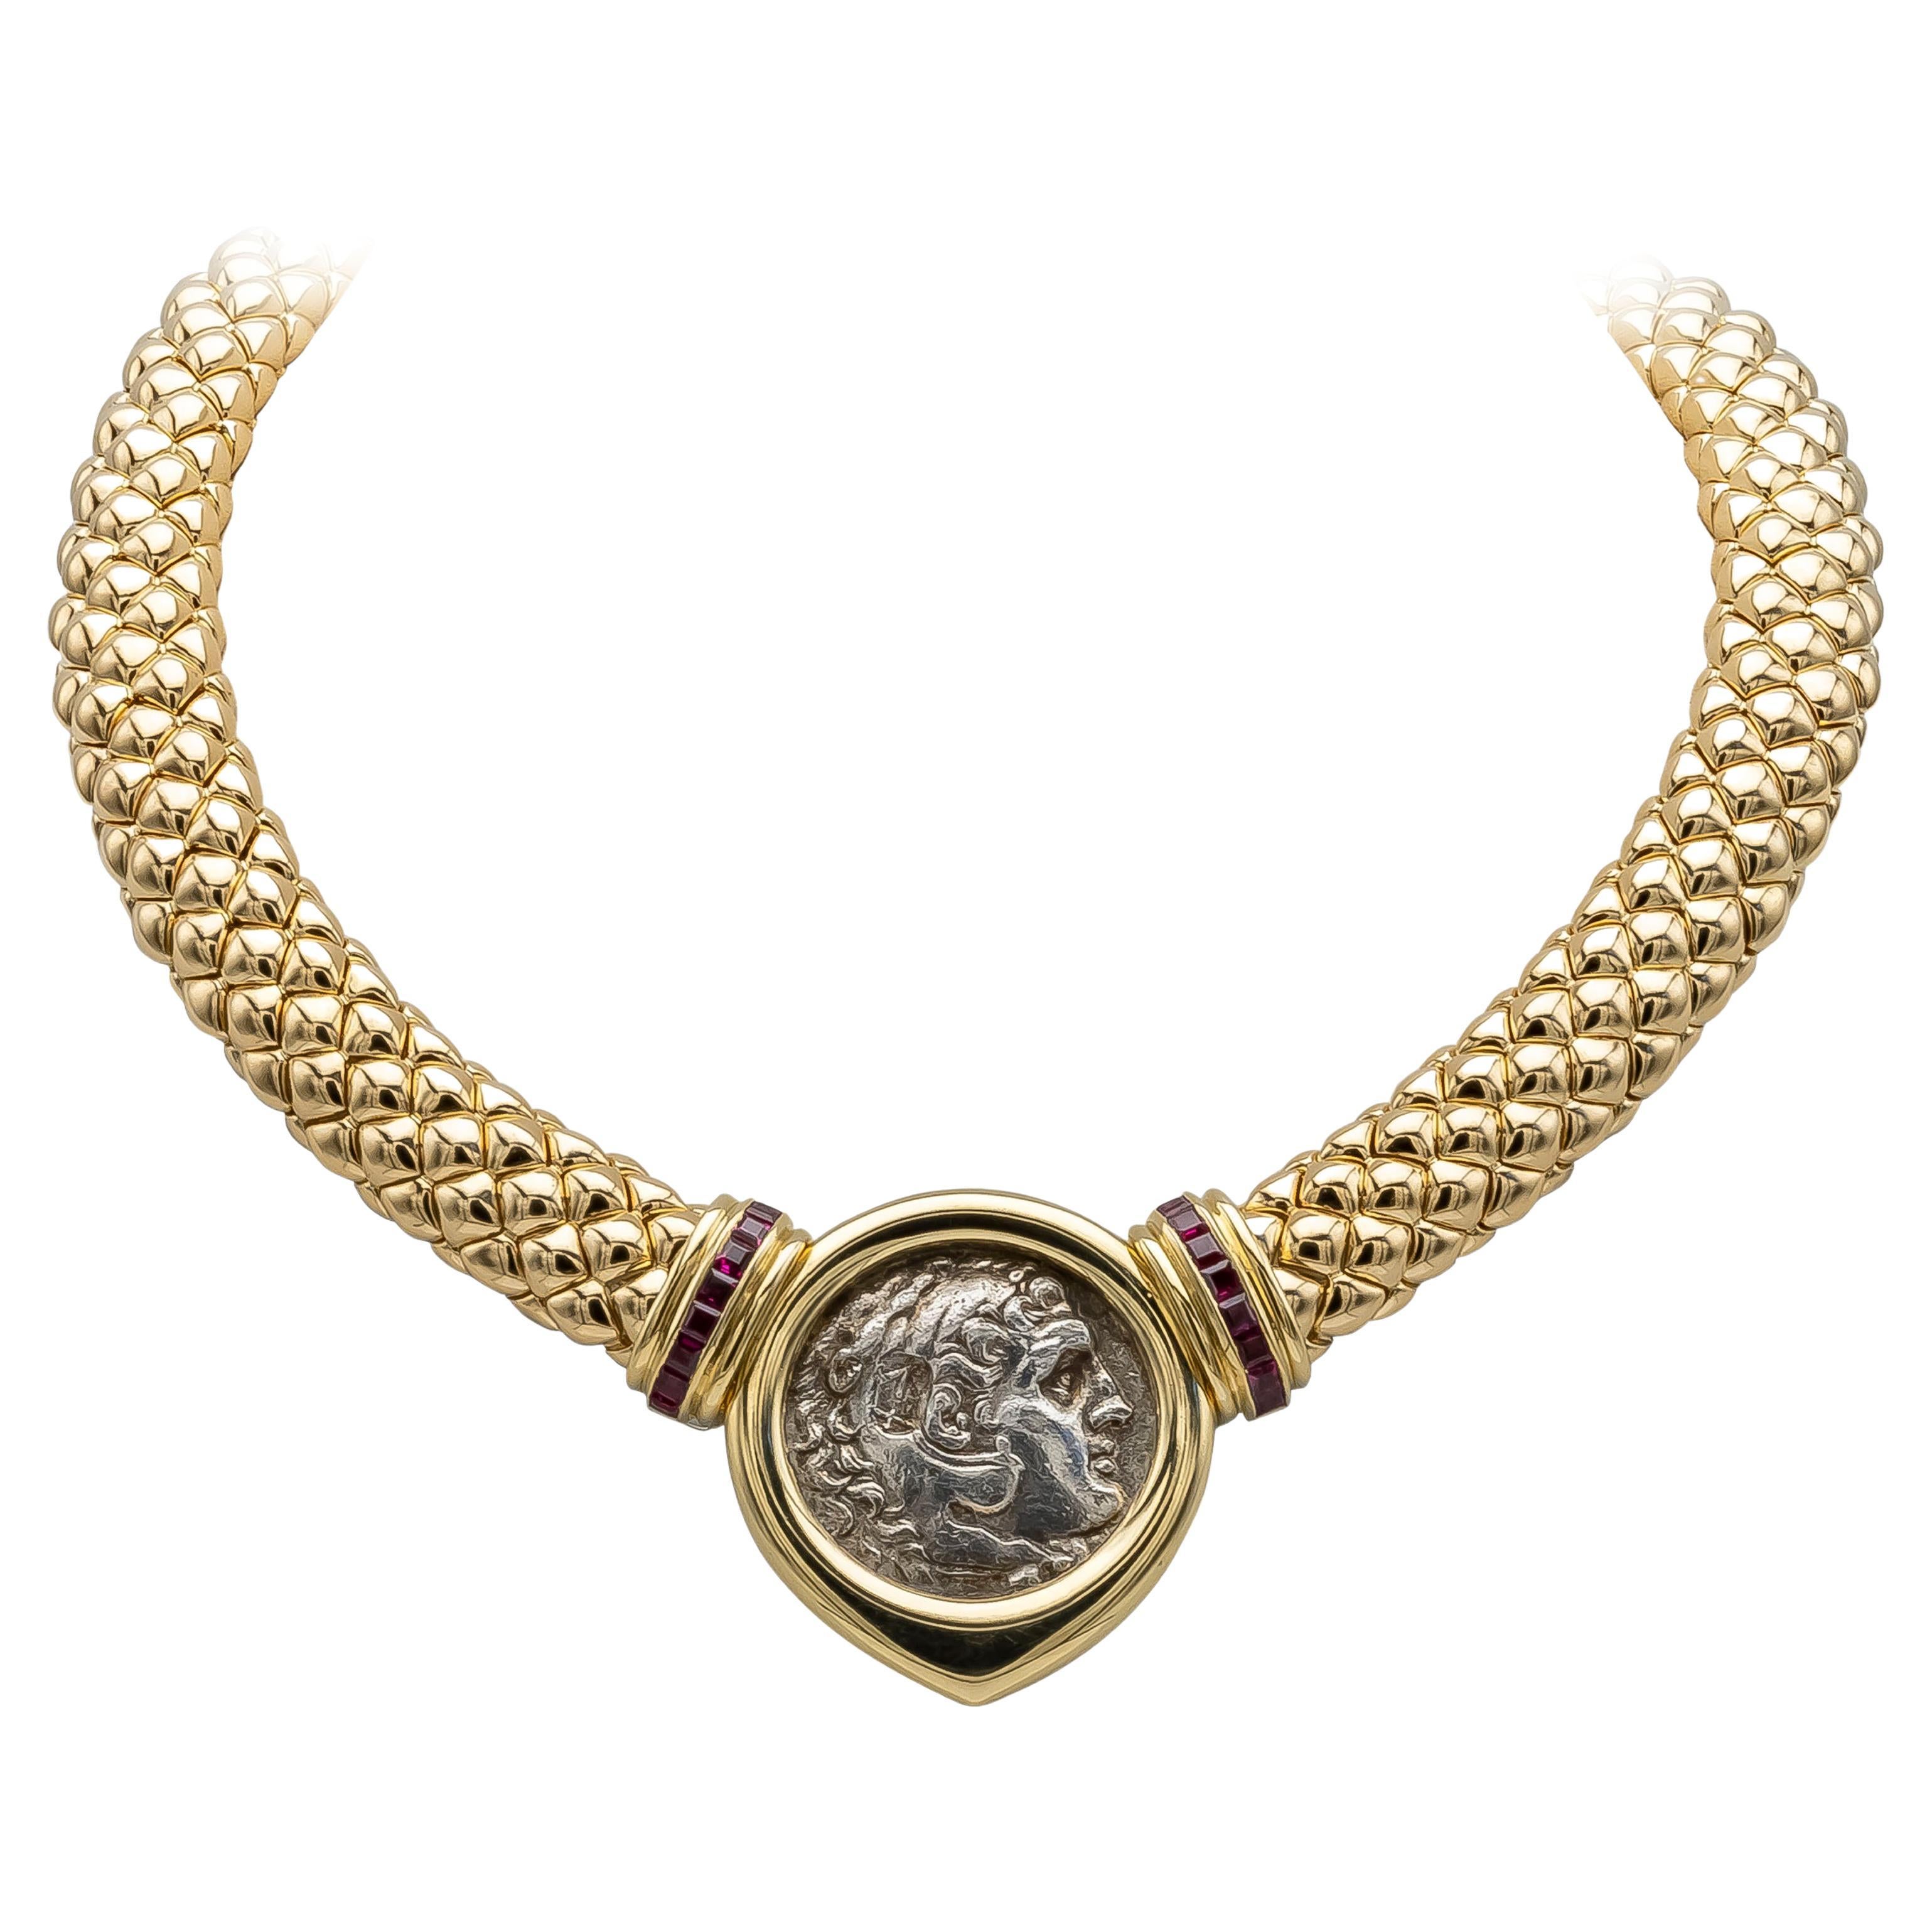 Genuine Lira Coin Necklace in 18kt Gold Over Sterling from Italy |  Ross-Simons | Coin jewelry, Coin pendant necklace, 18kt gold